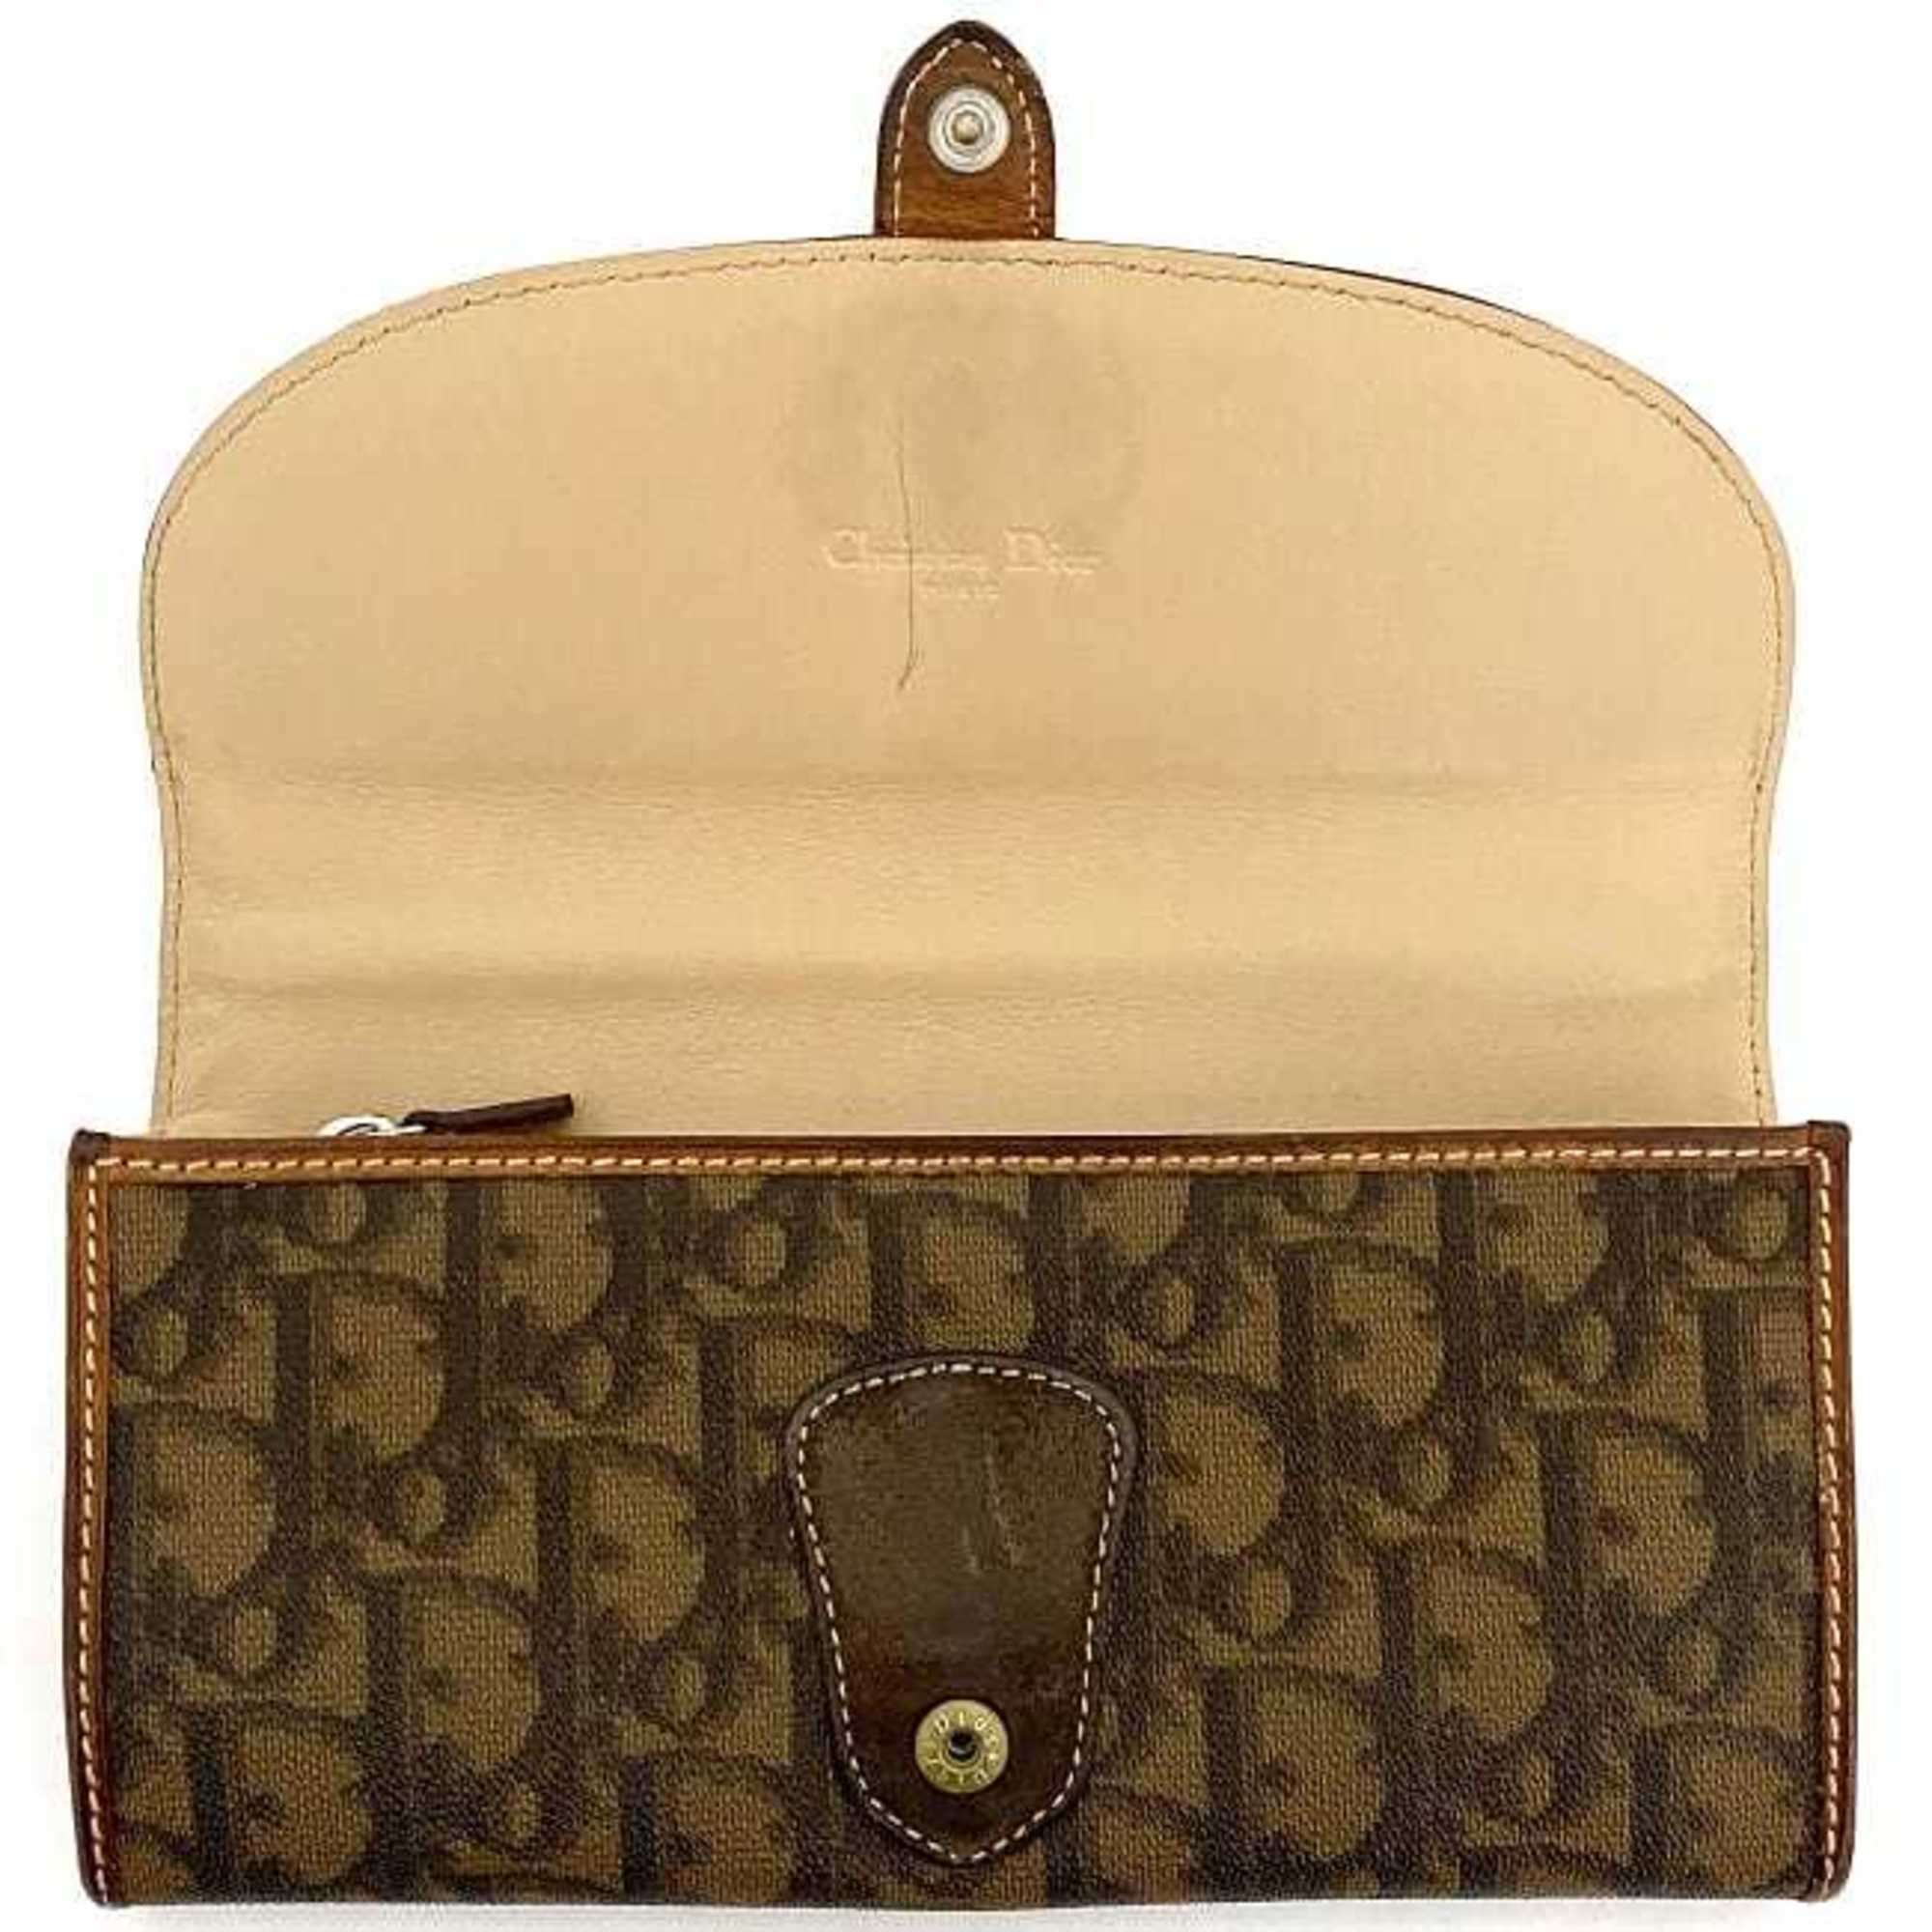 Christian Dior Bifold Long Wallet Brown Beige Silver Trotter PVC Leather Flap Heart